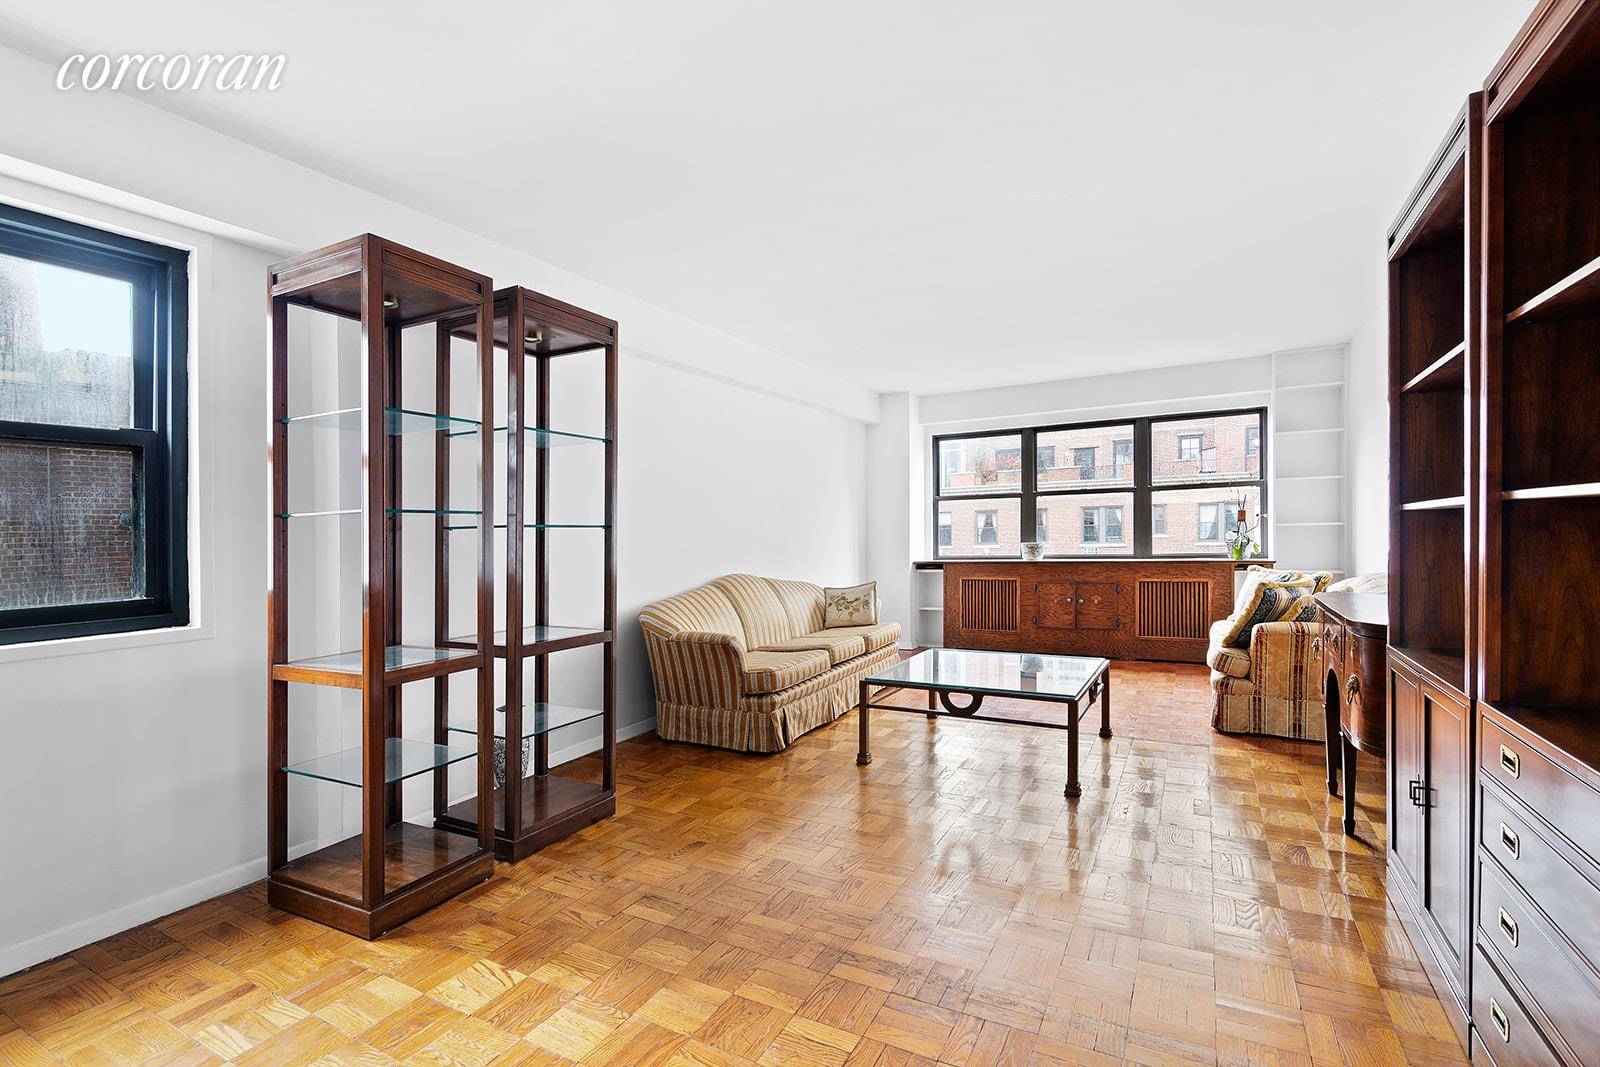 Welcome to Penthouse 18E, an 820 SqFt 76 m2 one bedroom situated on 57th Street in the heart of Sutton Place !